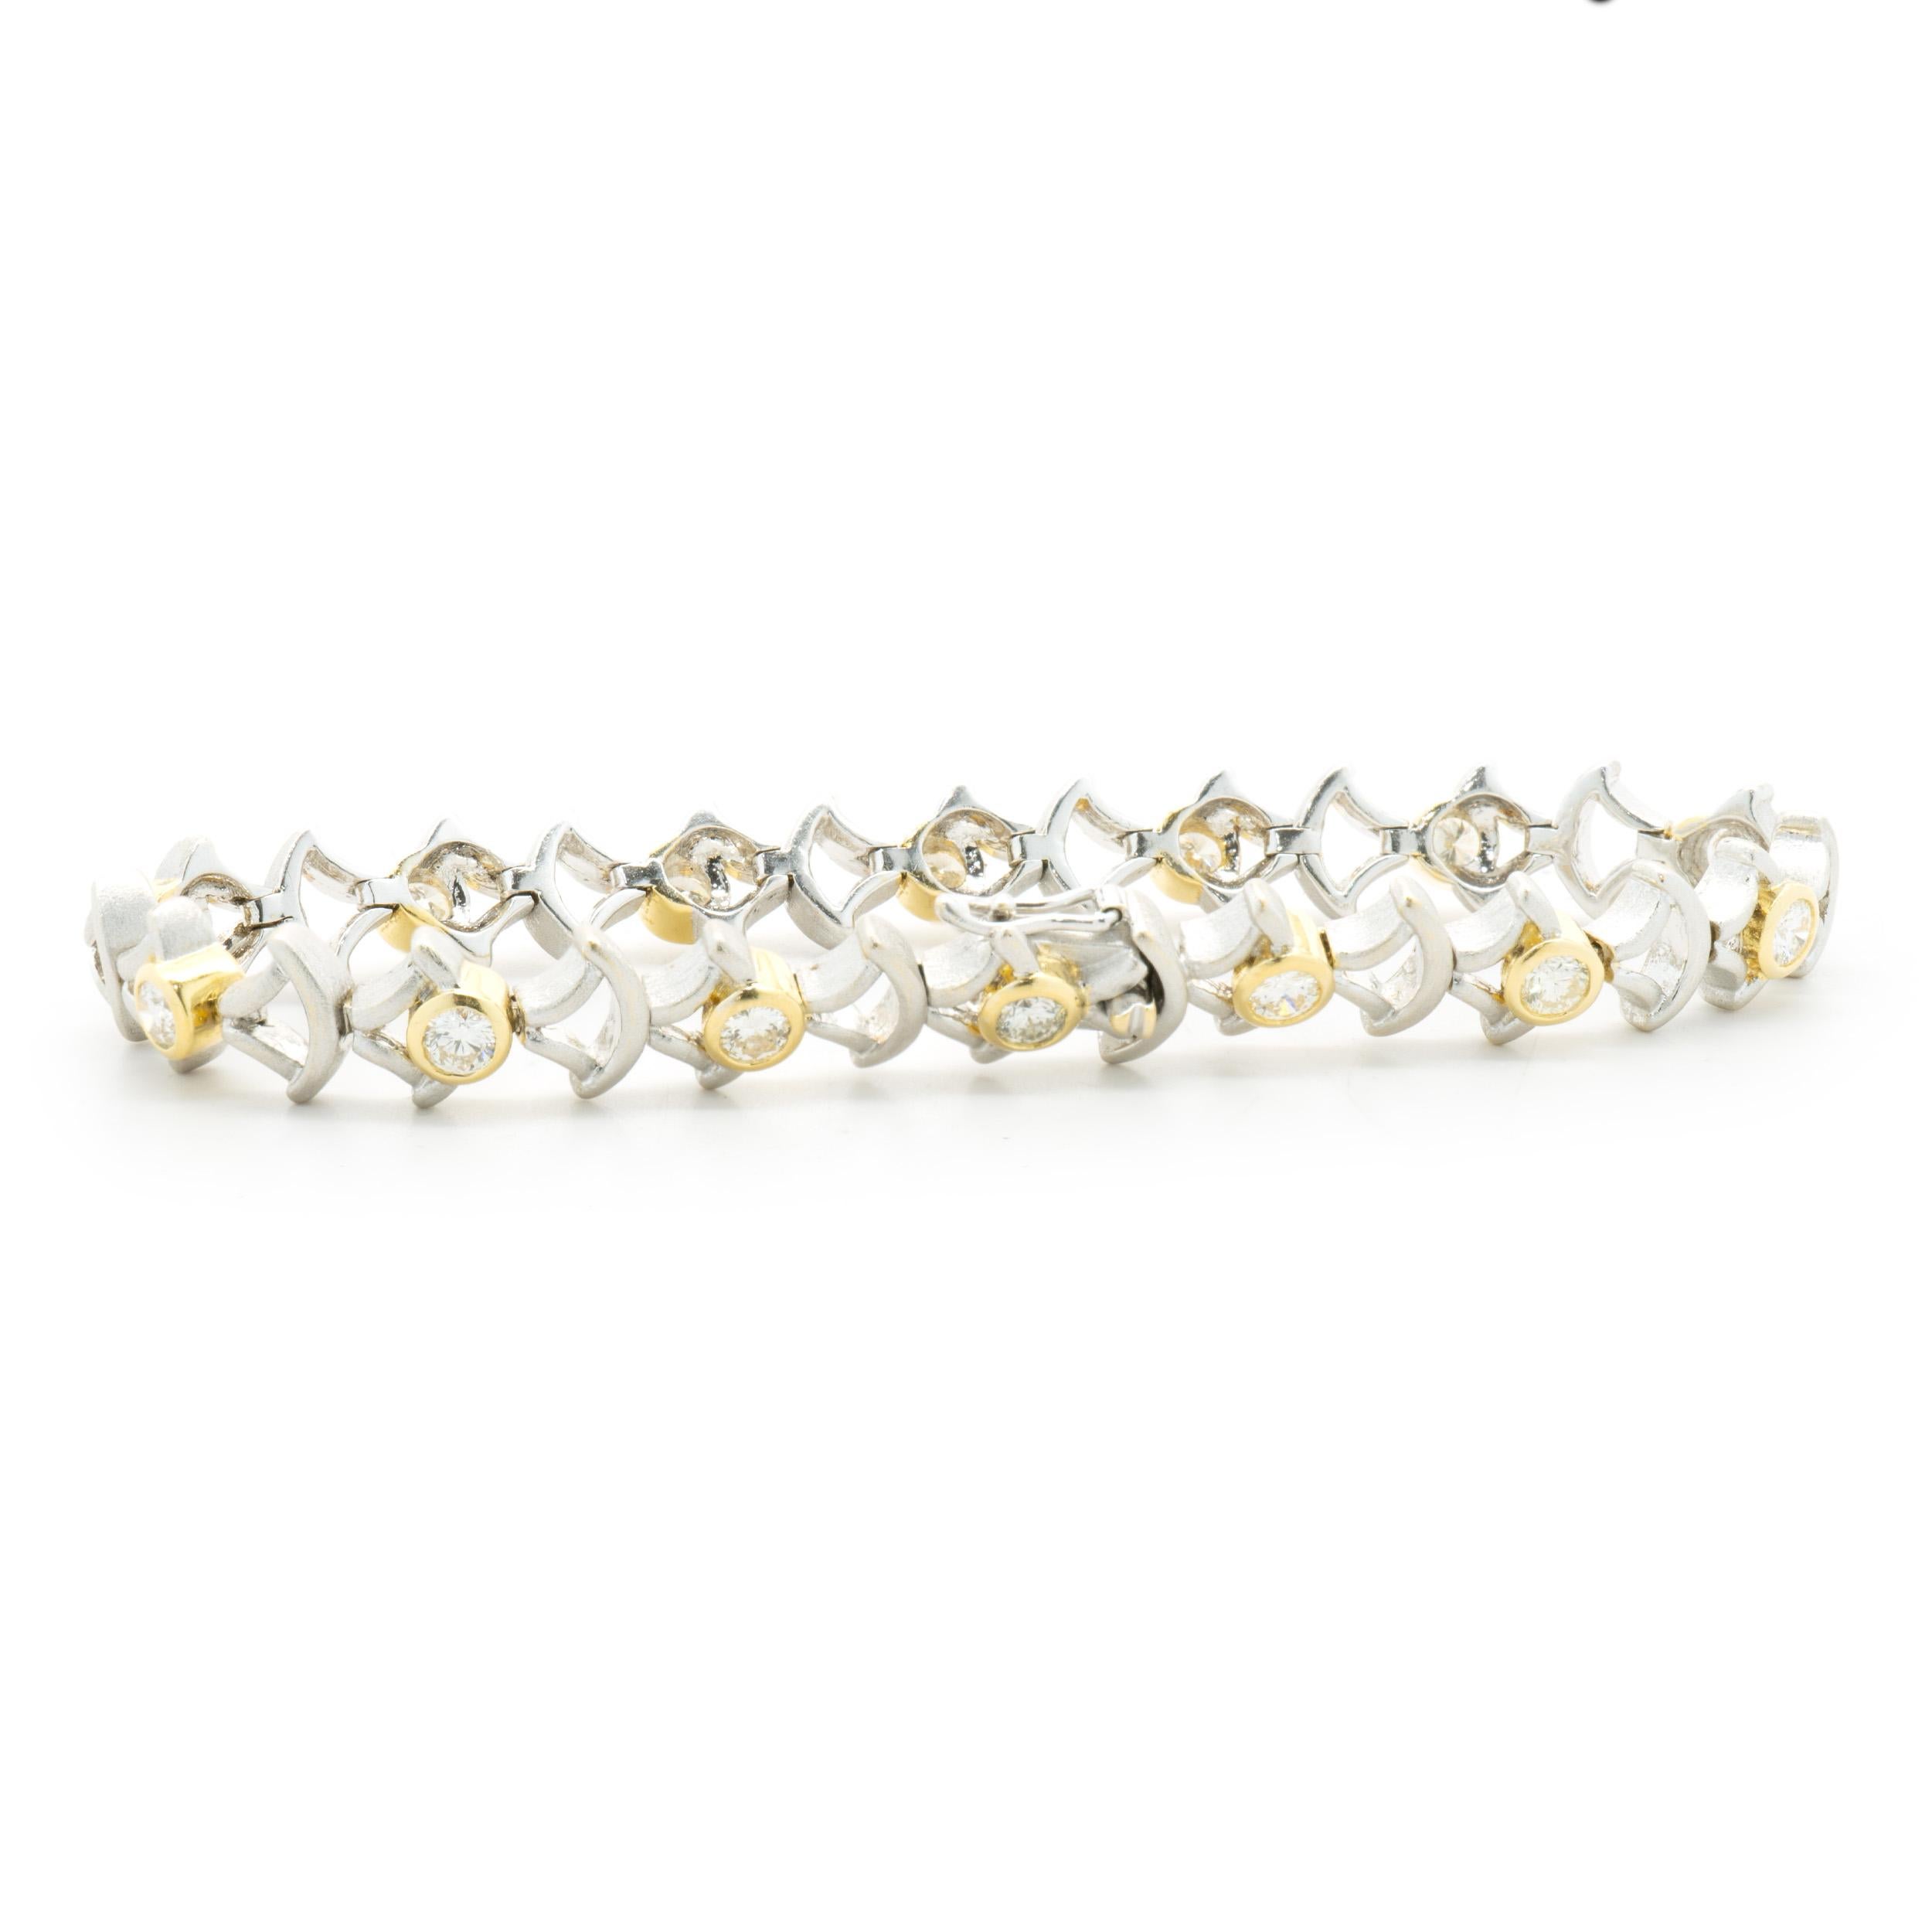 Designer: custom design
Material: 18K white & yellow gold
Diamond: 14 round brilliant cut = 1.80cttw
Color: J / K / L
Clarity: SI1-2
Dimensions: bracelet will fit up to a 6-inch wrist
Weight: 17.64 grams